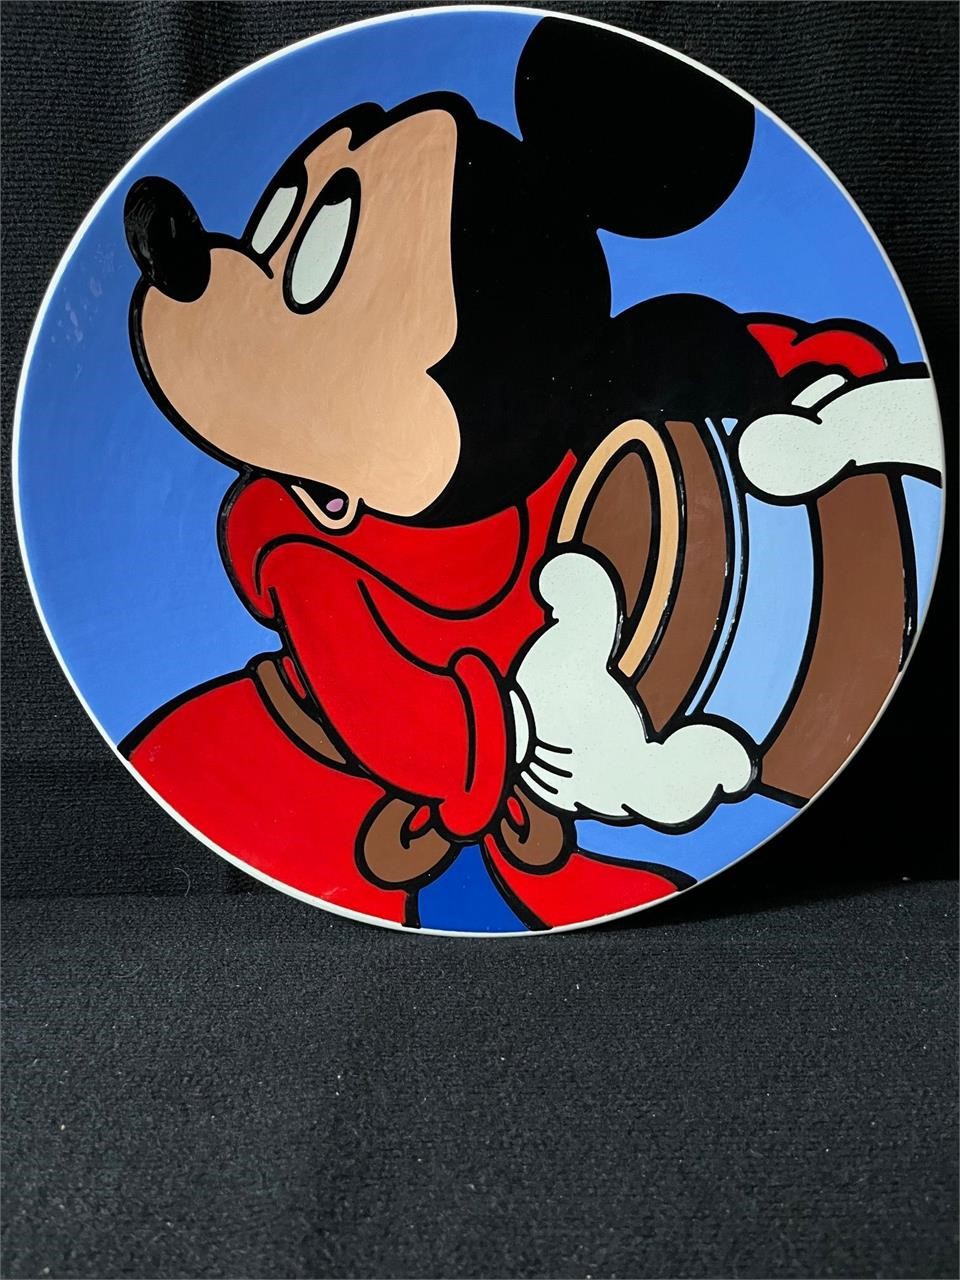 Mickey 18" Charger Plate, Brenda White #10/10 Rare